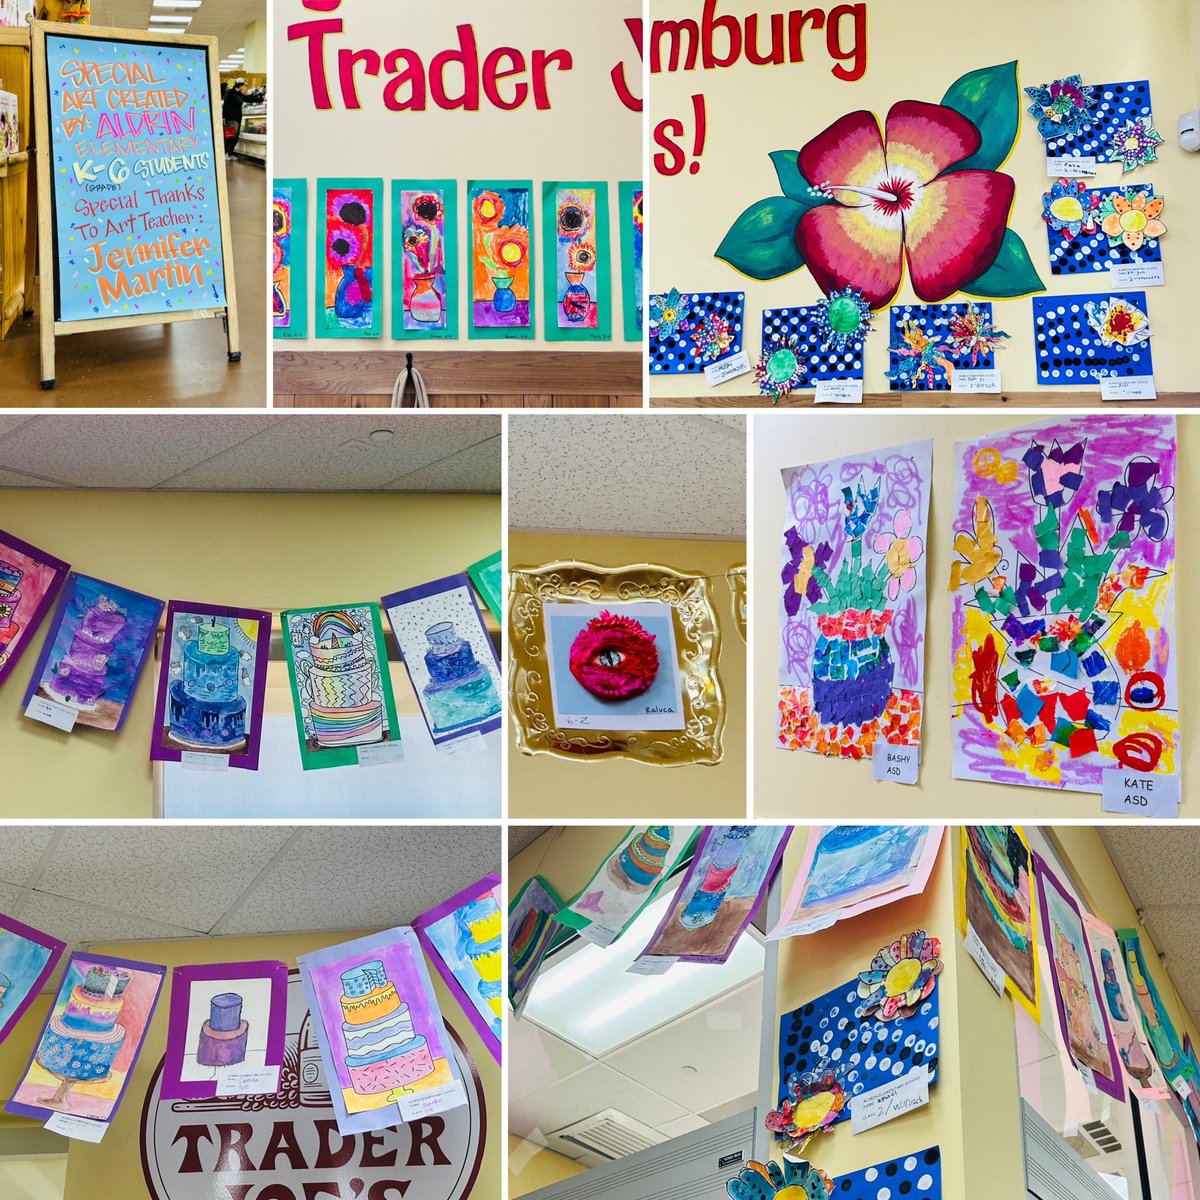 Come see the Aldrin Art Show at Trader Joe’s in Schaumburg! There’s so much to see! Thank you TJ’s for hosting us! @D54schools #aldrinallin #weare54